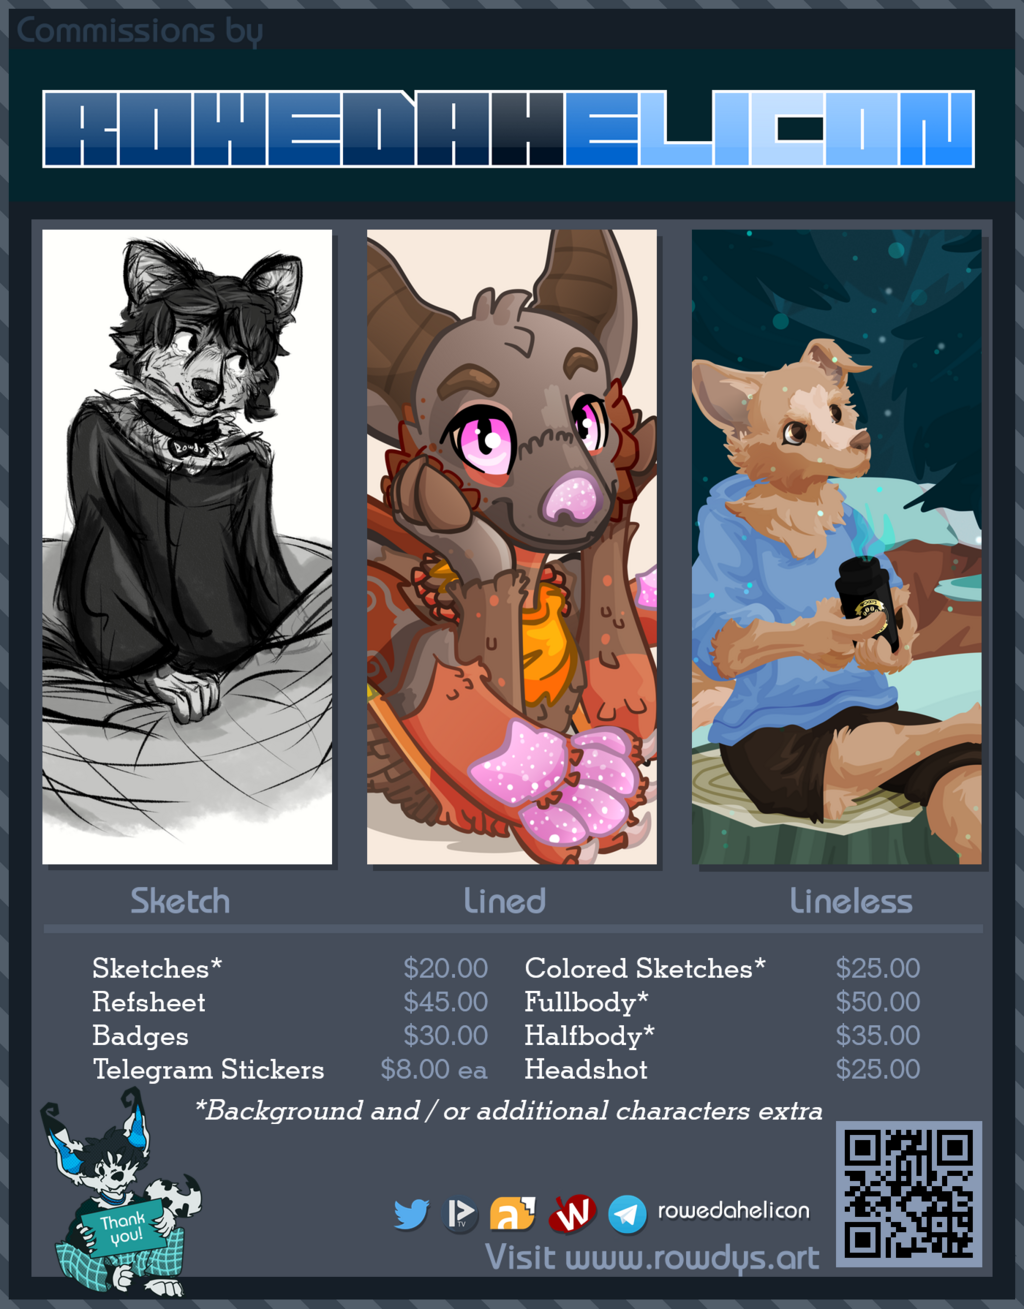 Commissions are now open!